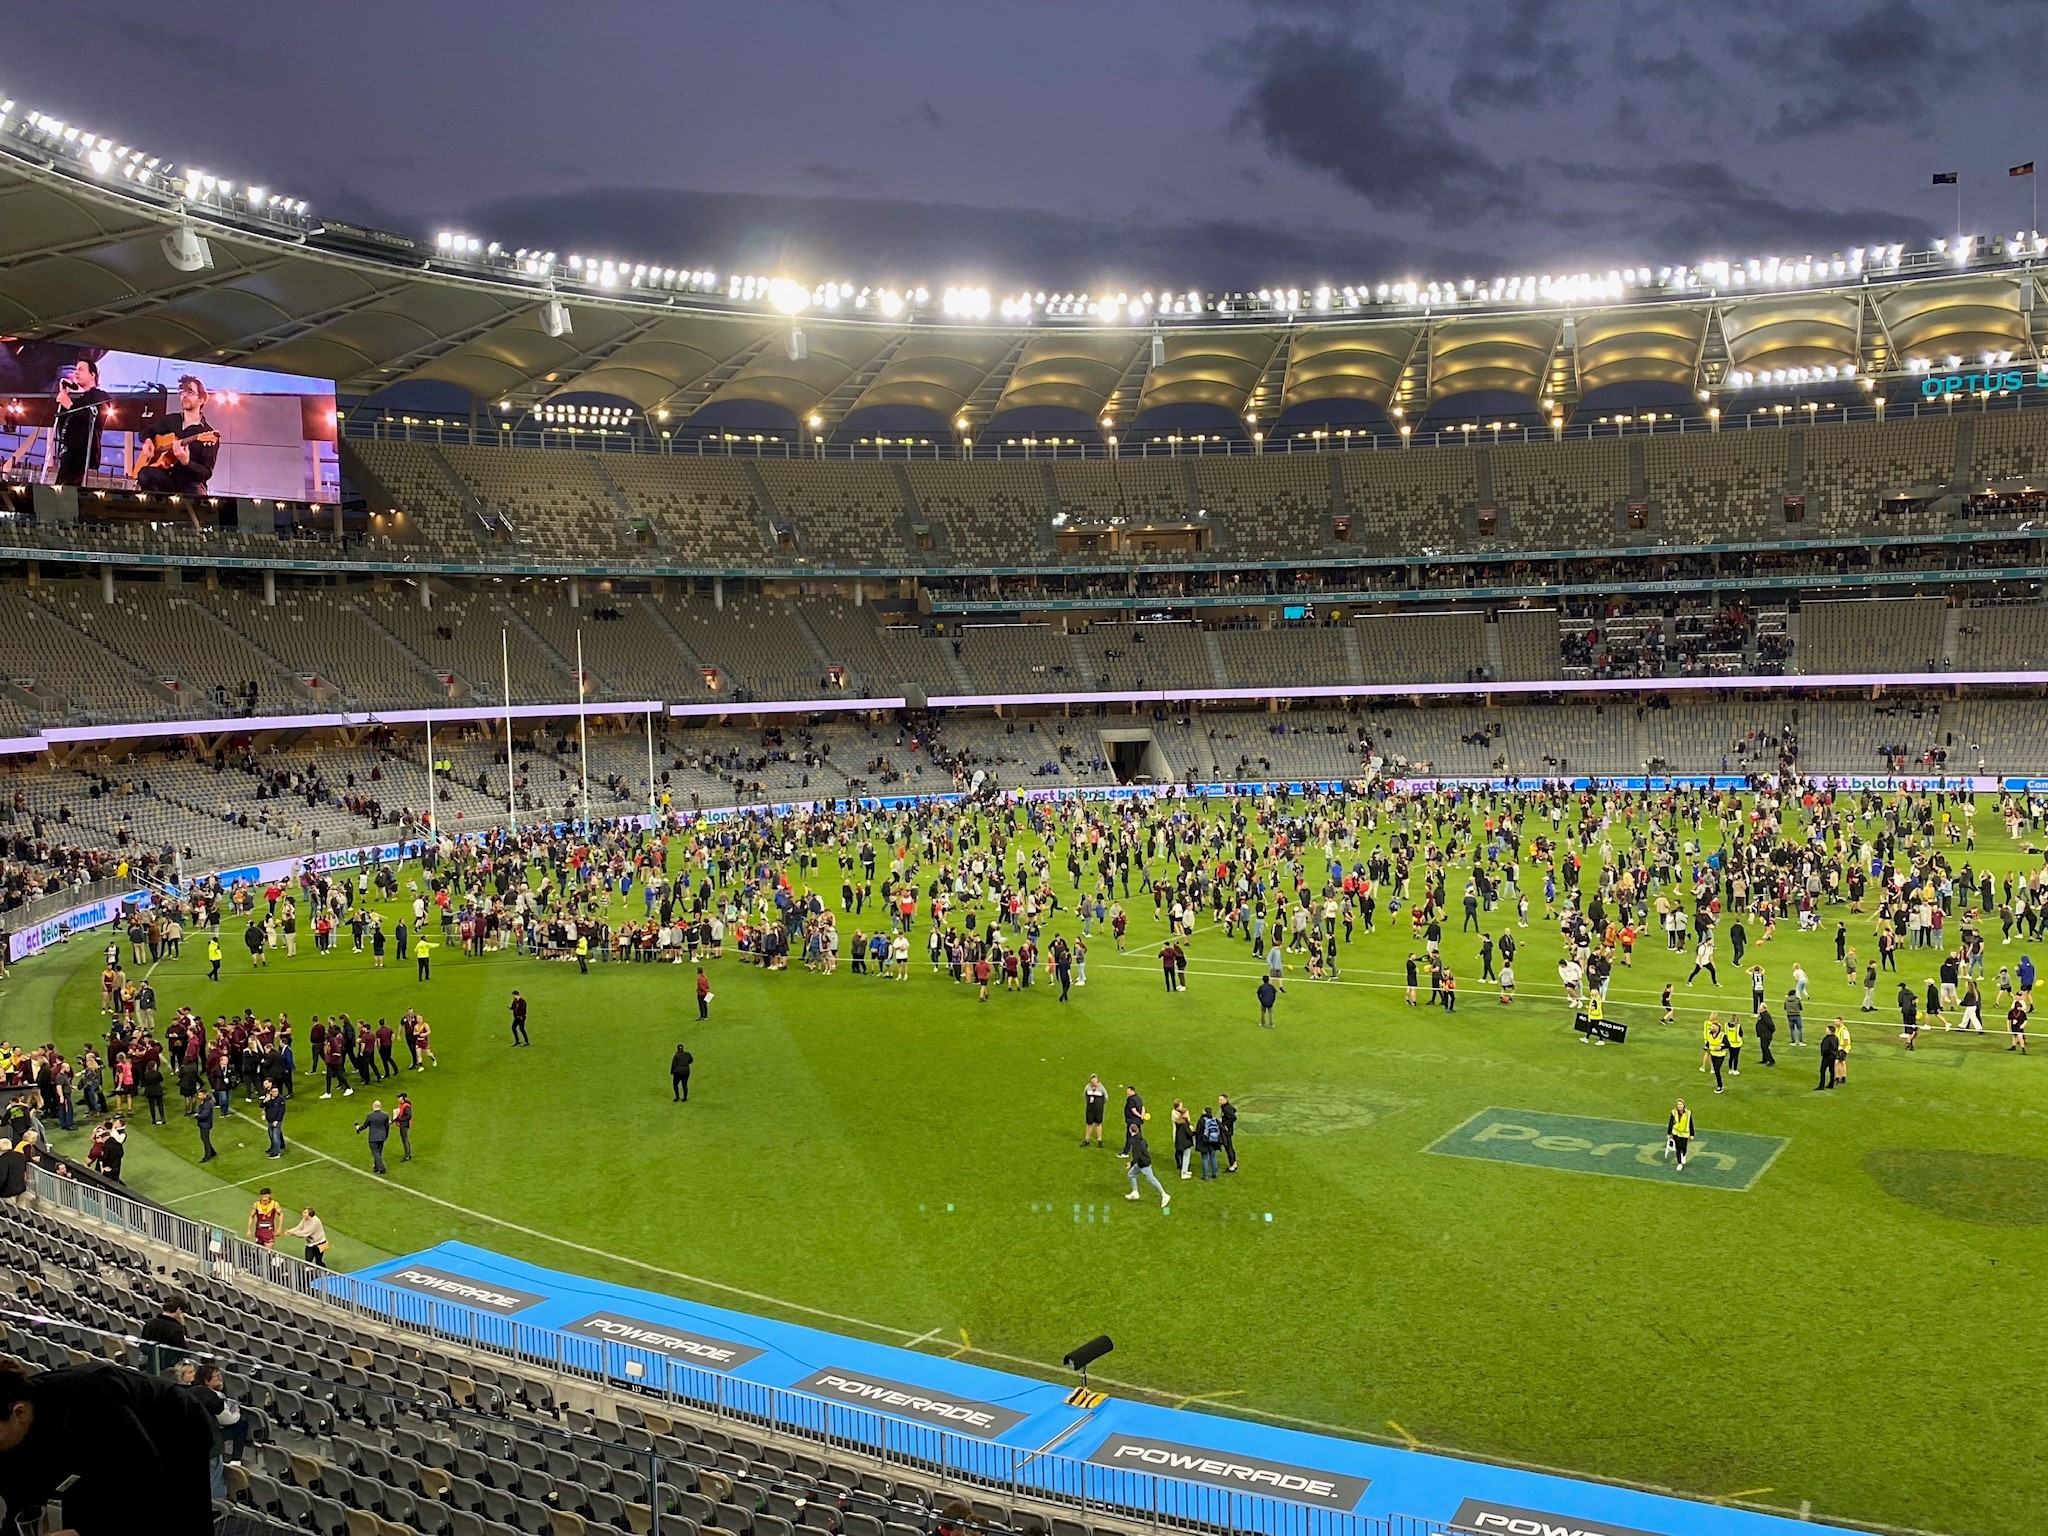 a crowd of people participating in Kick2Kick football activity on Optus Stadium Field.